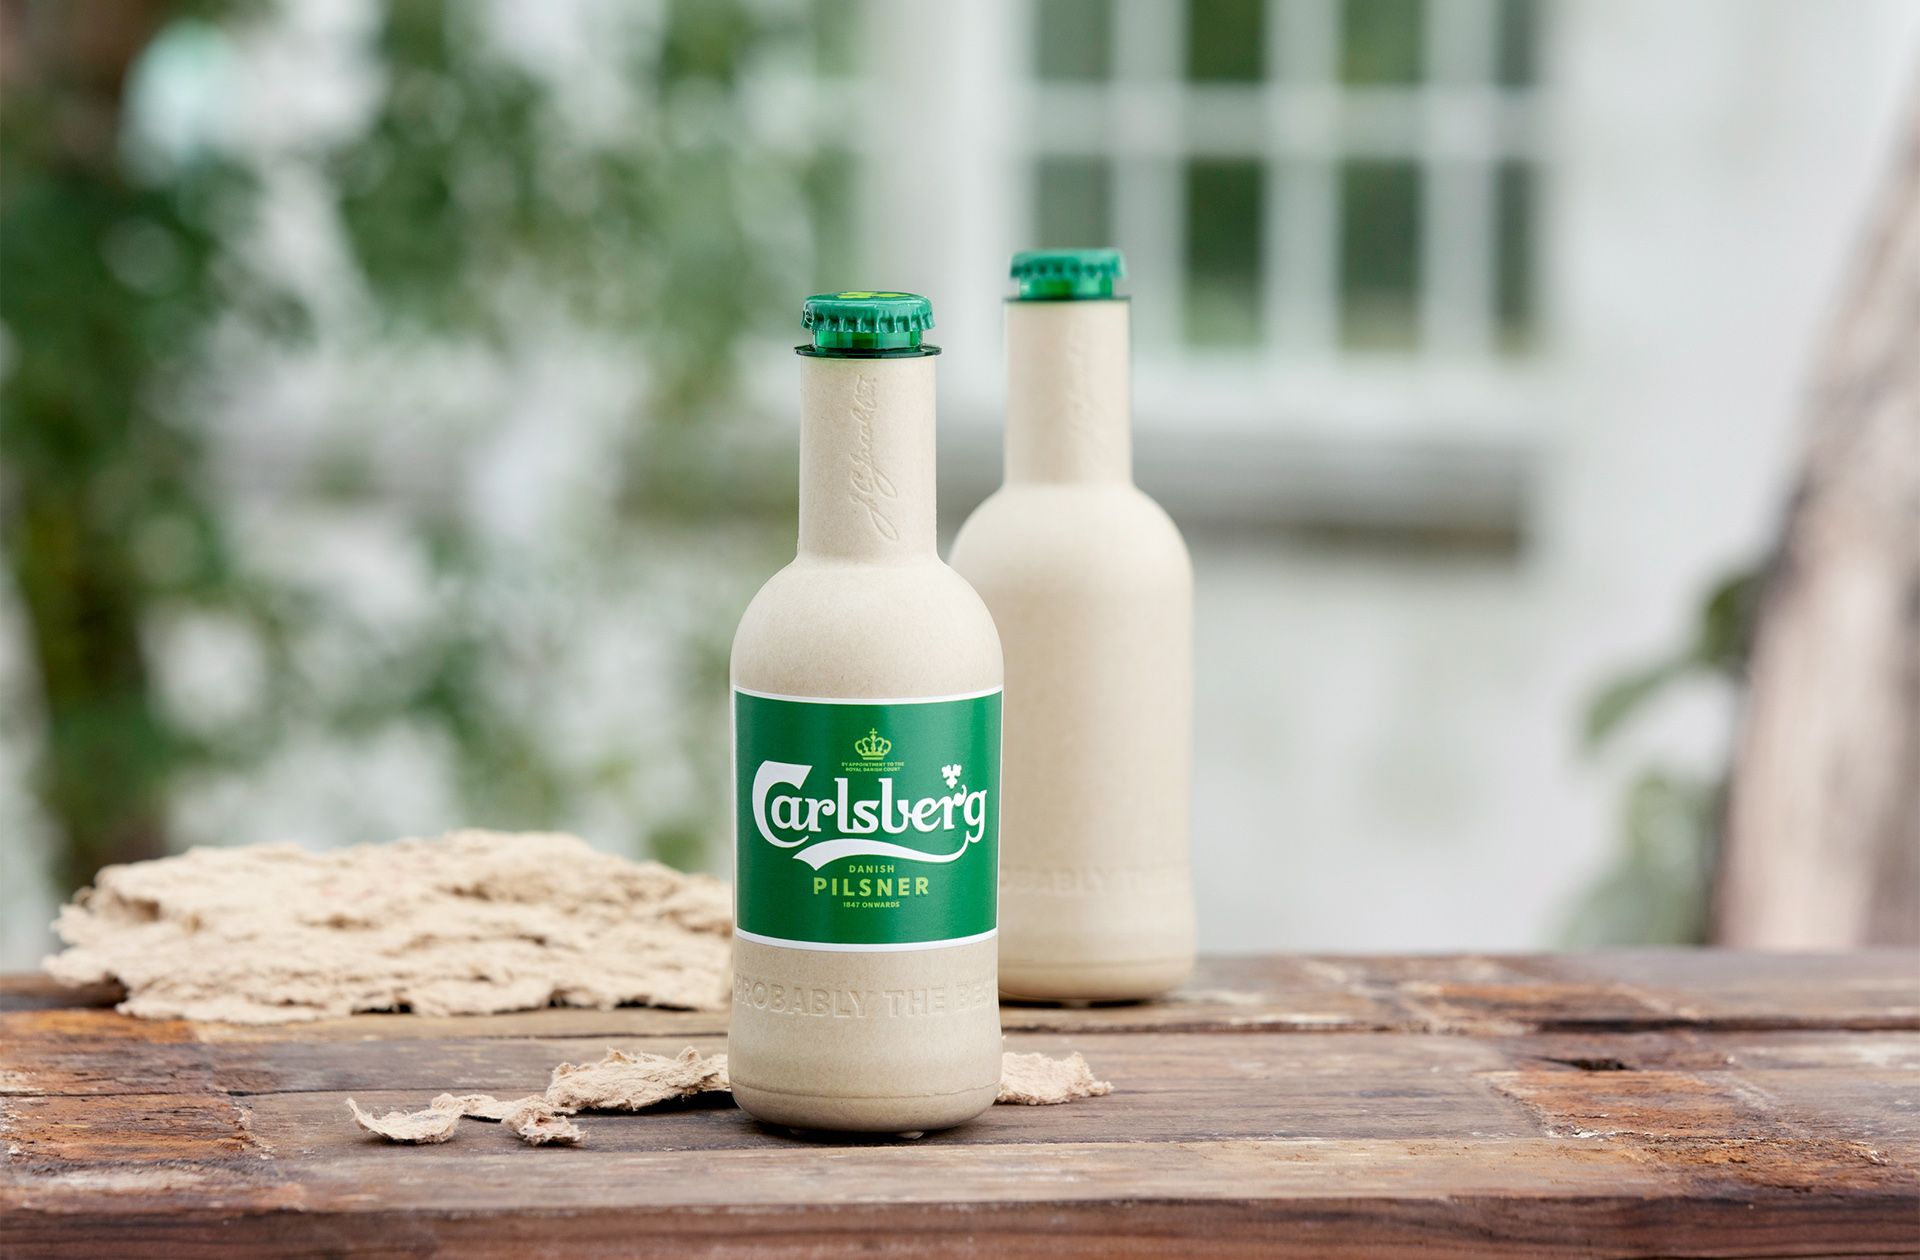 Green Fibre Bottle aims to become the world’s first bio-based beer bottle made from natural materials. Produced primarily using natural wood fibers, which come from certified sustainable sources, the bottle is fully recyclable. 